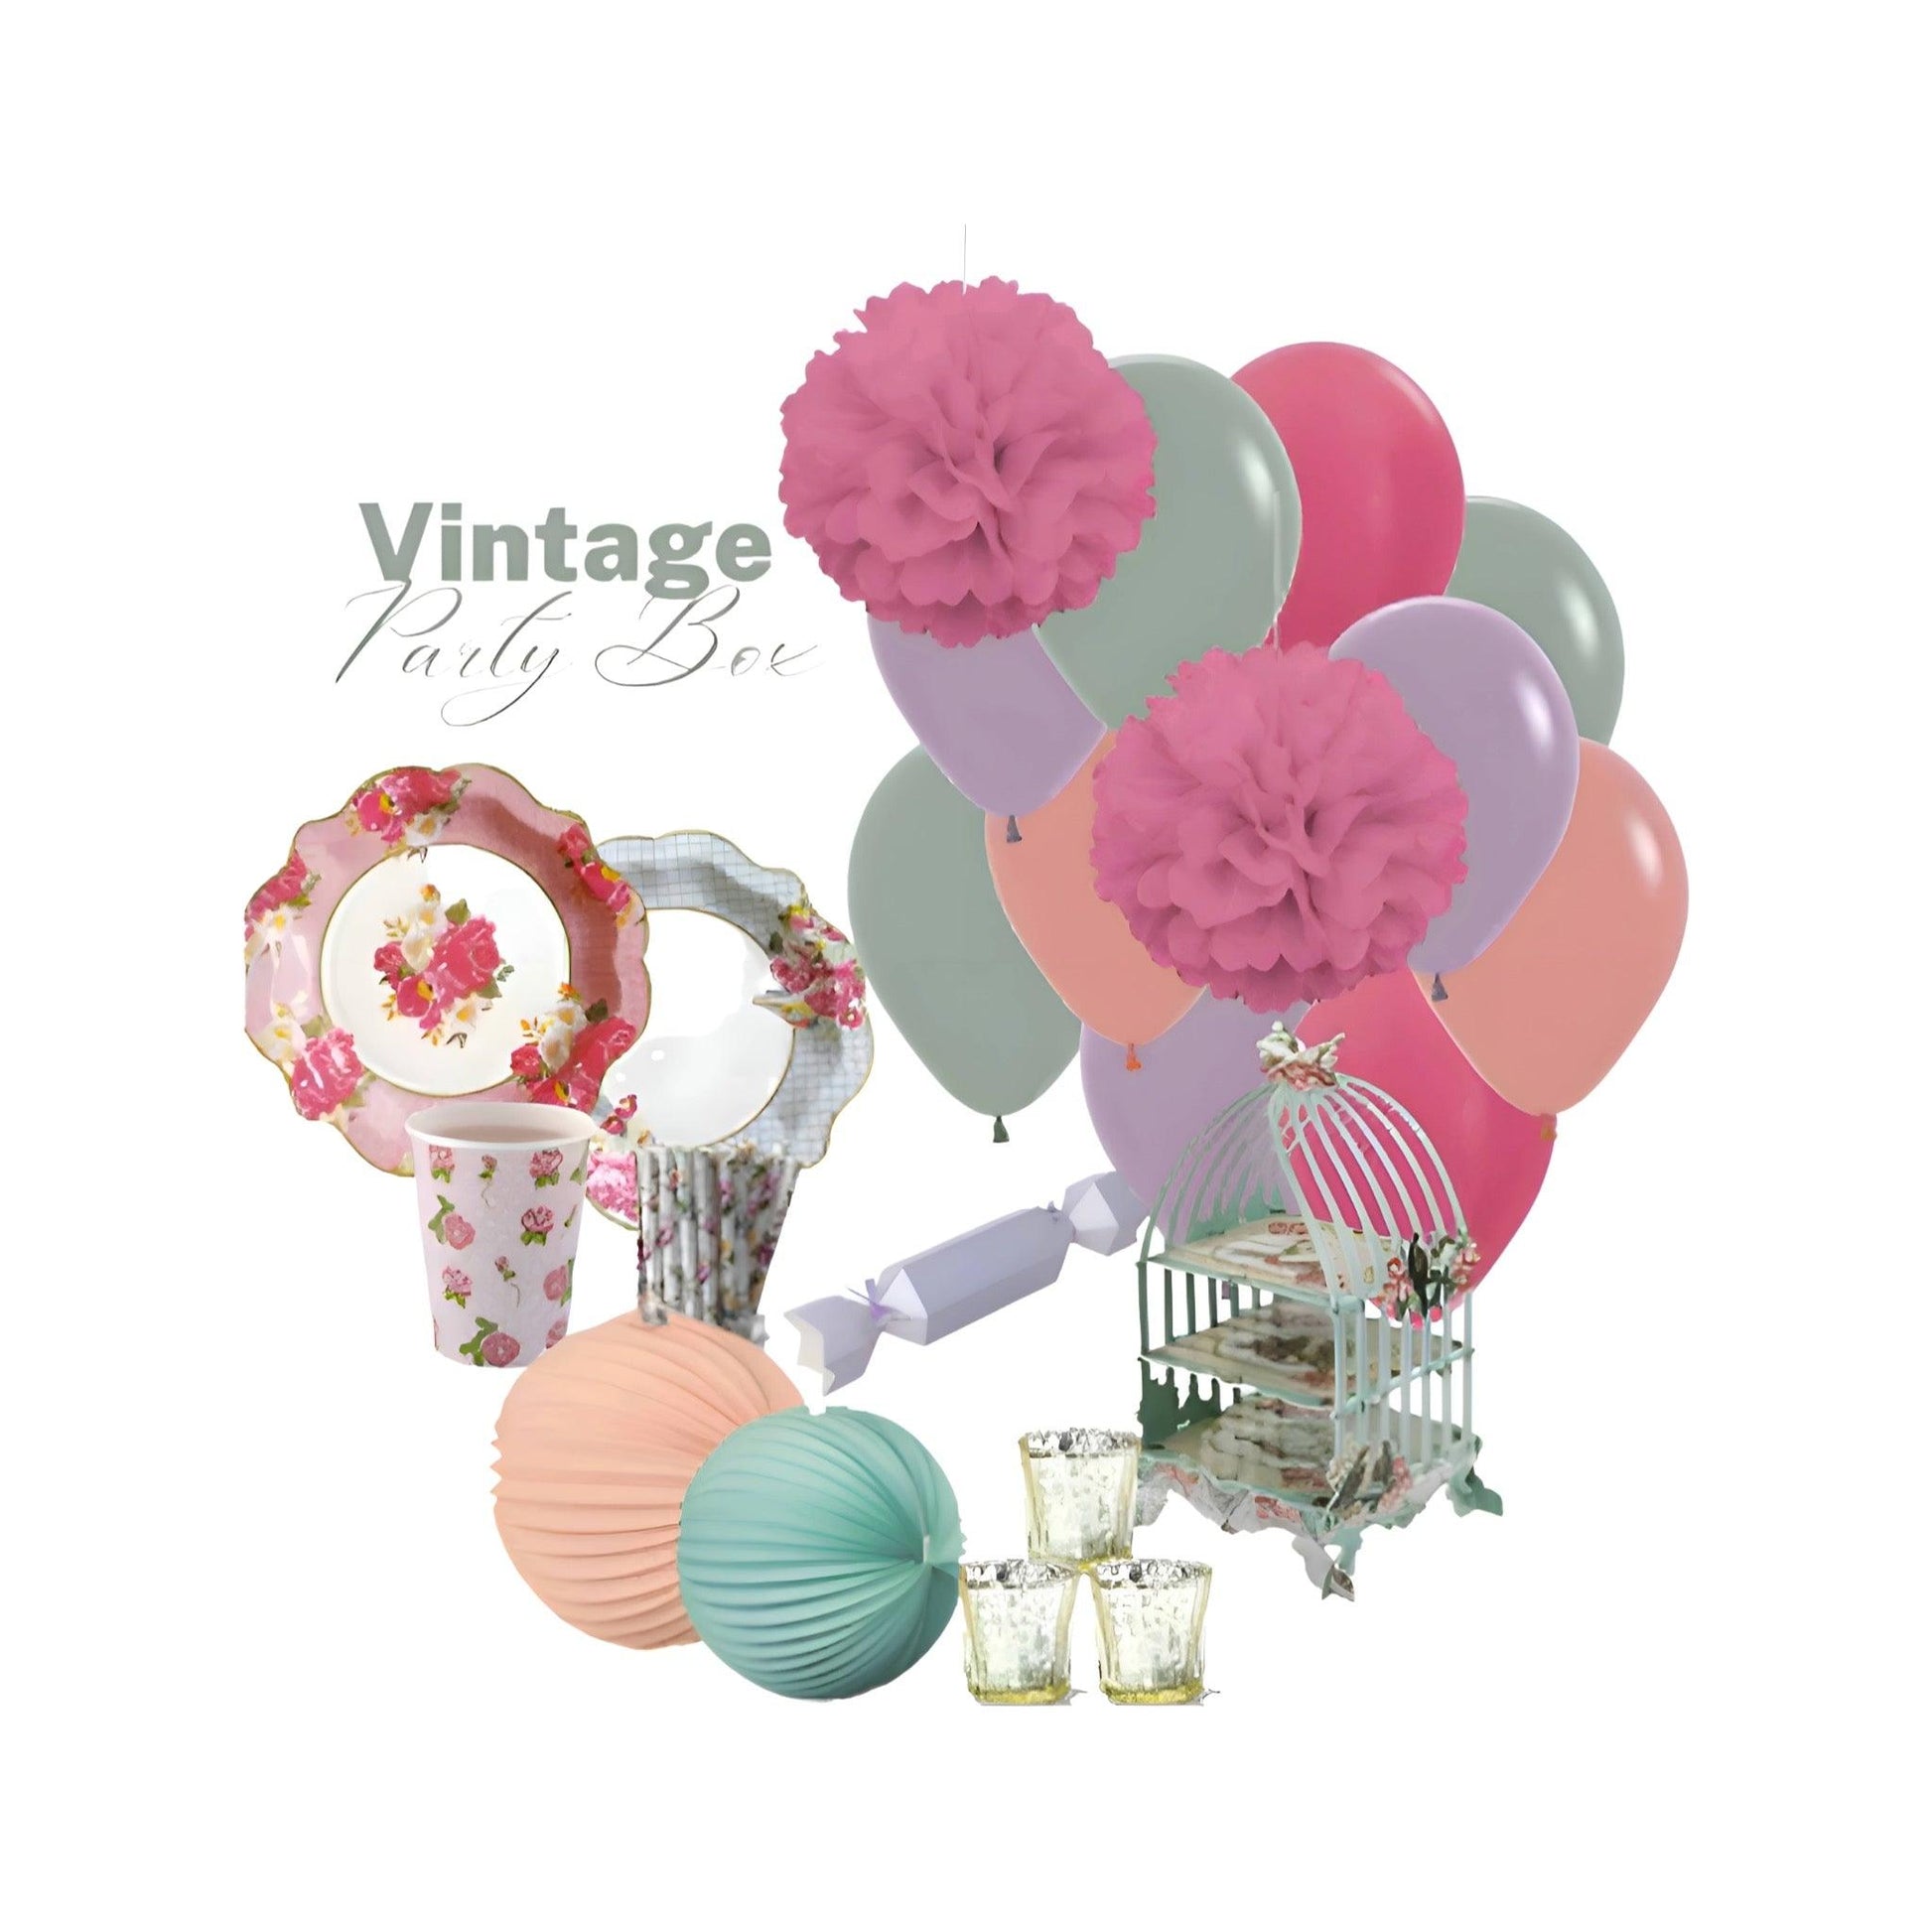 All Inclusive Party Box With Balloons, Plates, Cups, Straws, Lanterns, Cake Stand, Bon Bons & tissue Puff Balls.